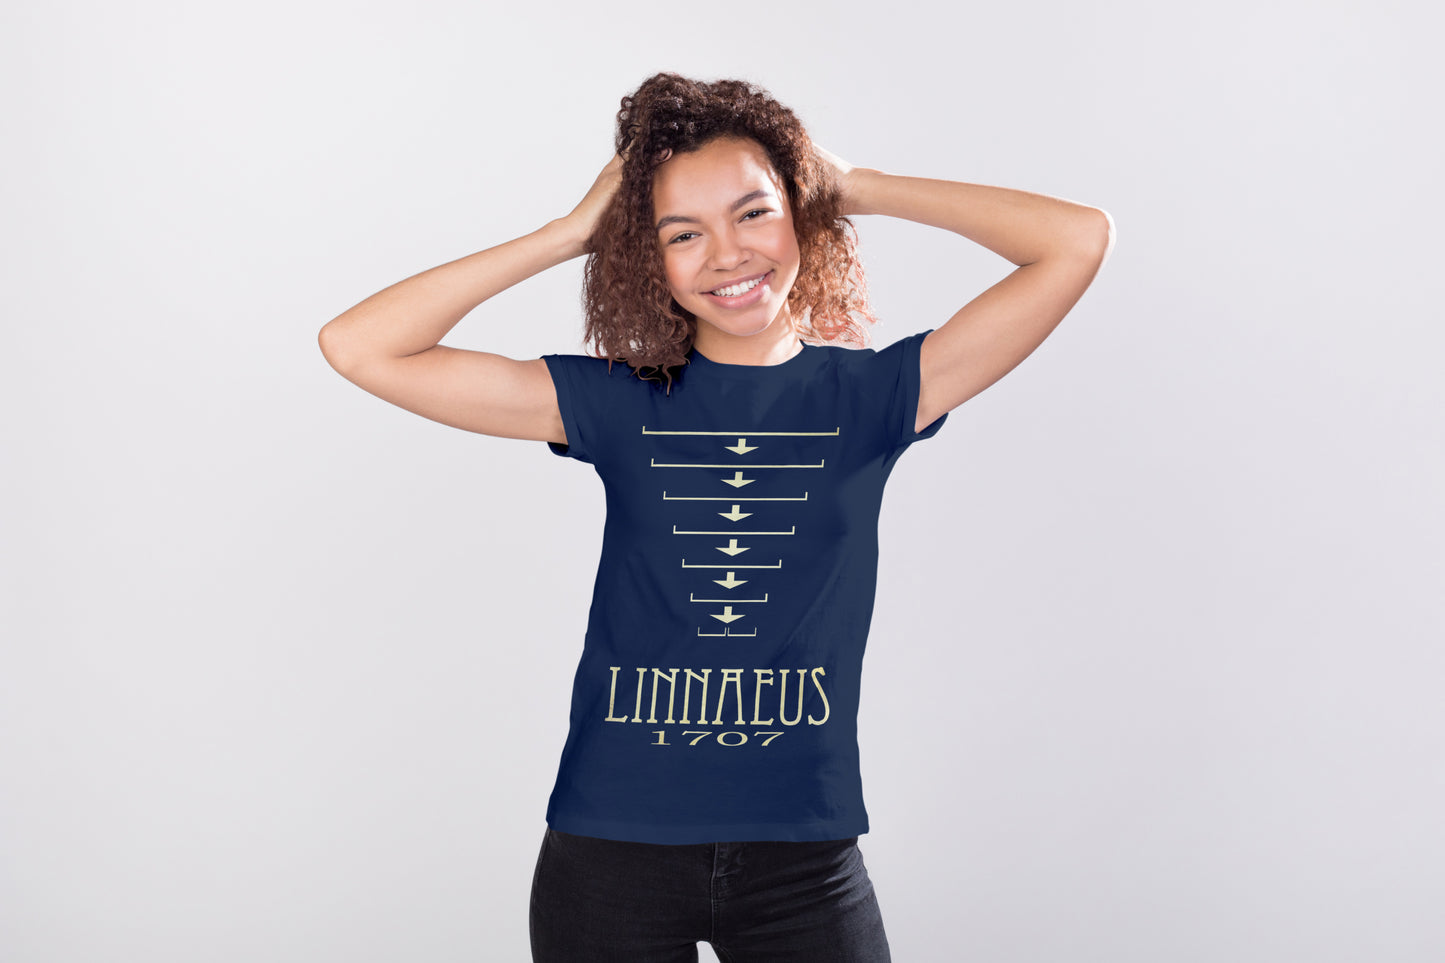 Linnaeus Taxonomy T-shirt, Zoology and Botany Graphic Tee